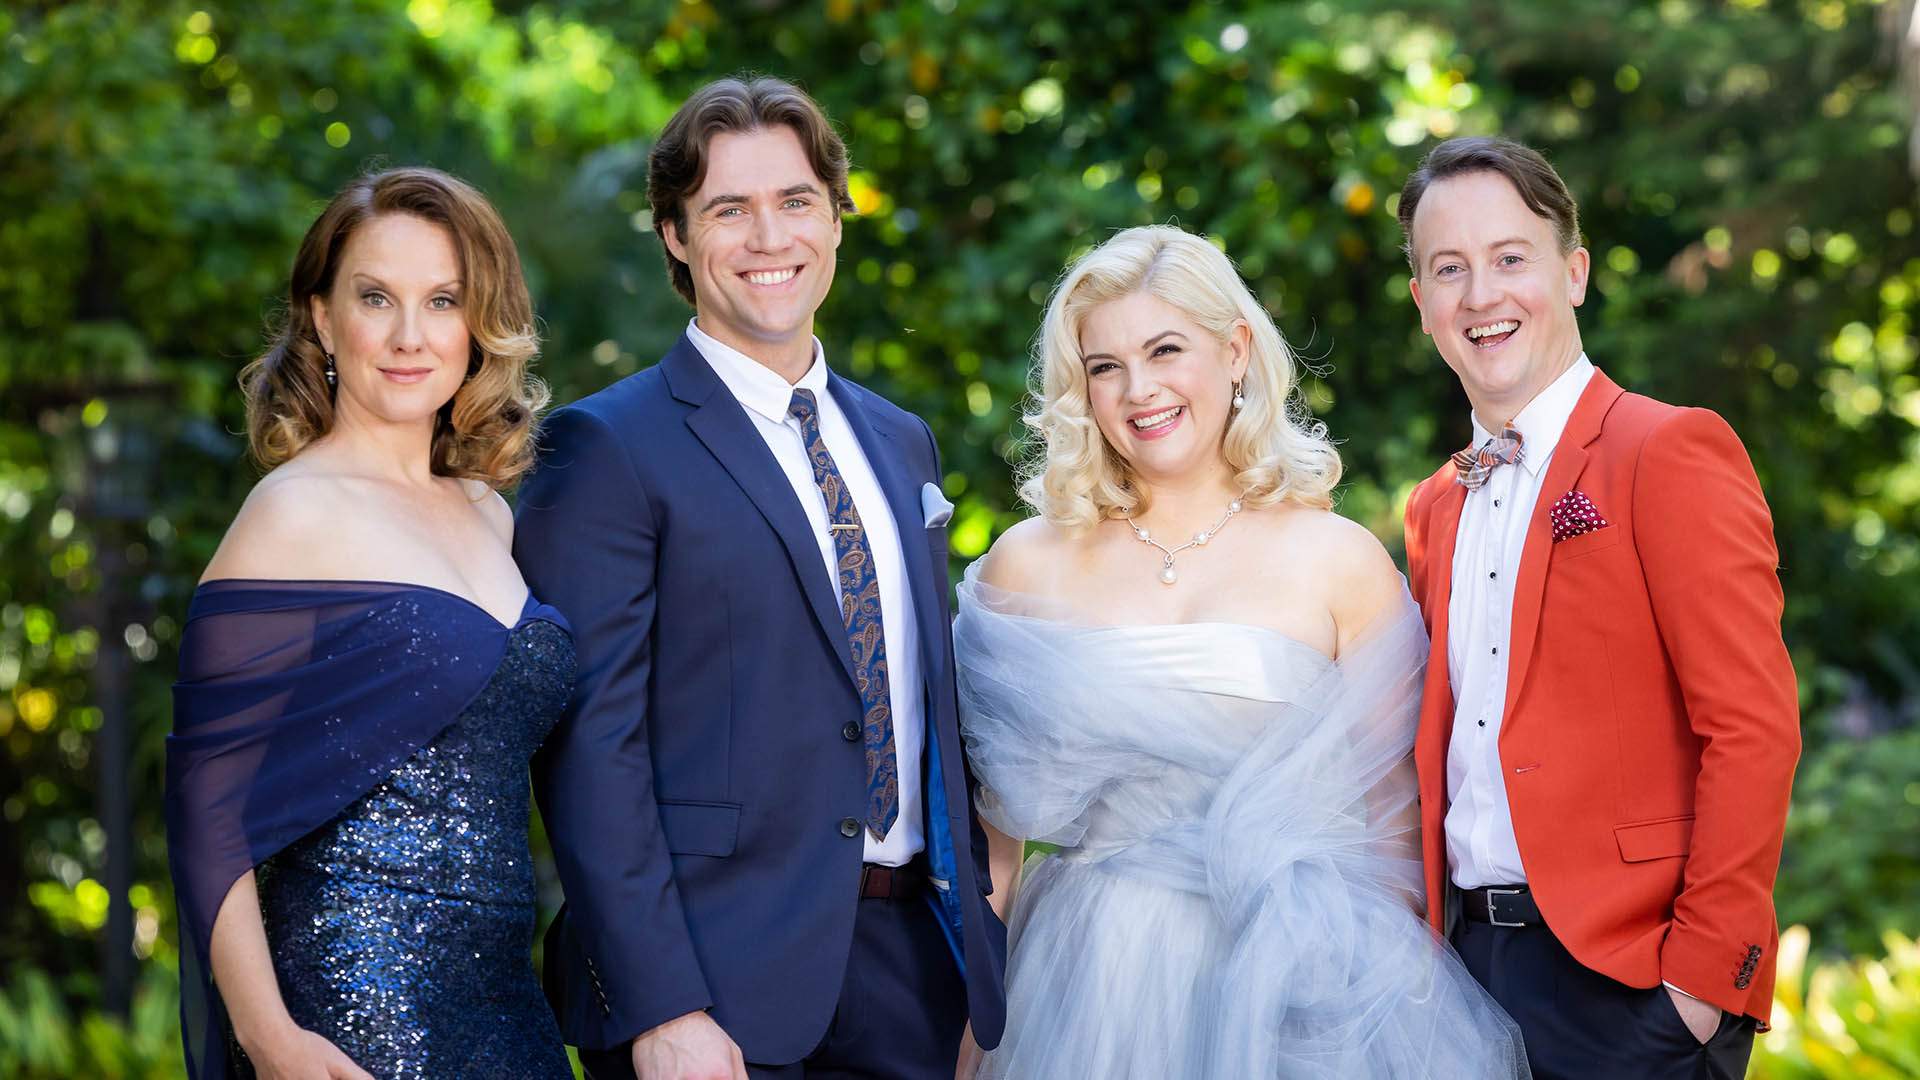 A New 'Cinderella'-Inspired Australian Rom-Com Musical Will Premiere in Melbourne in 2023